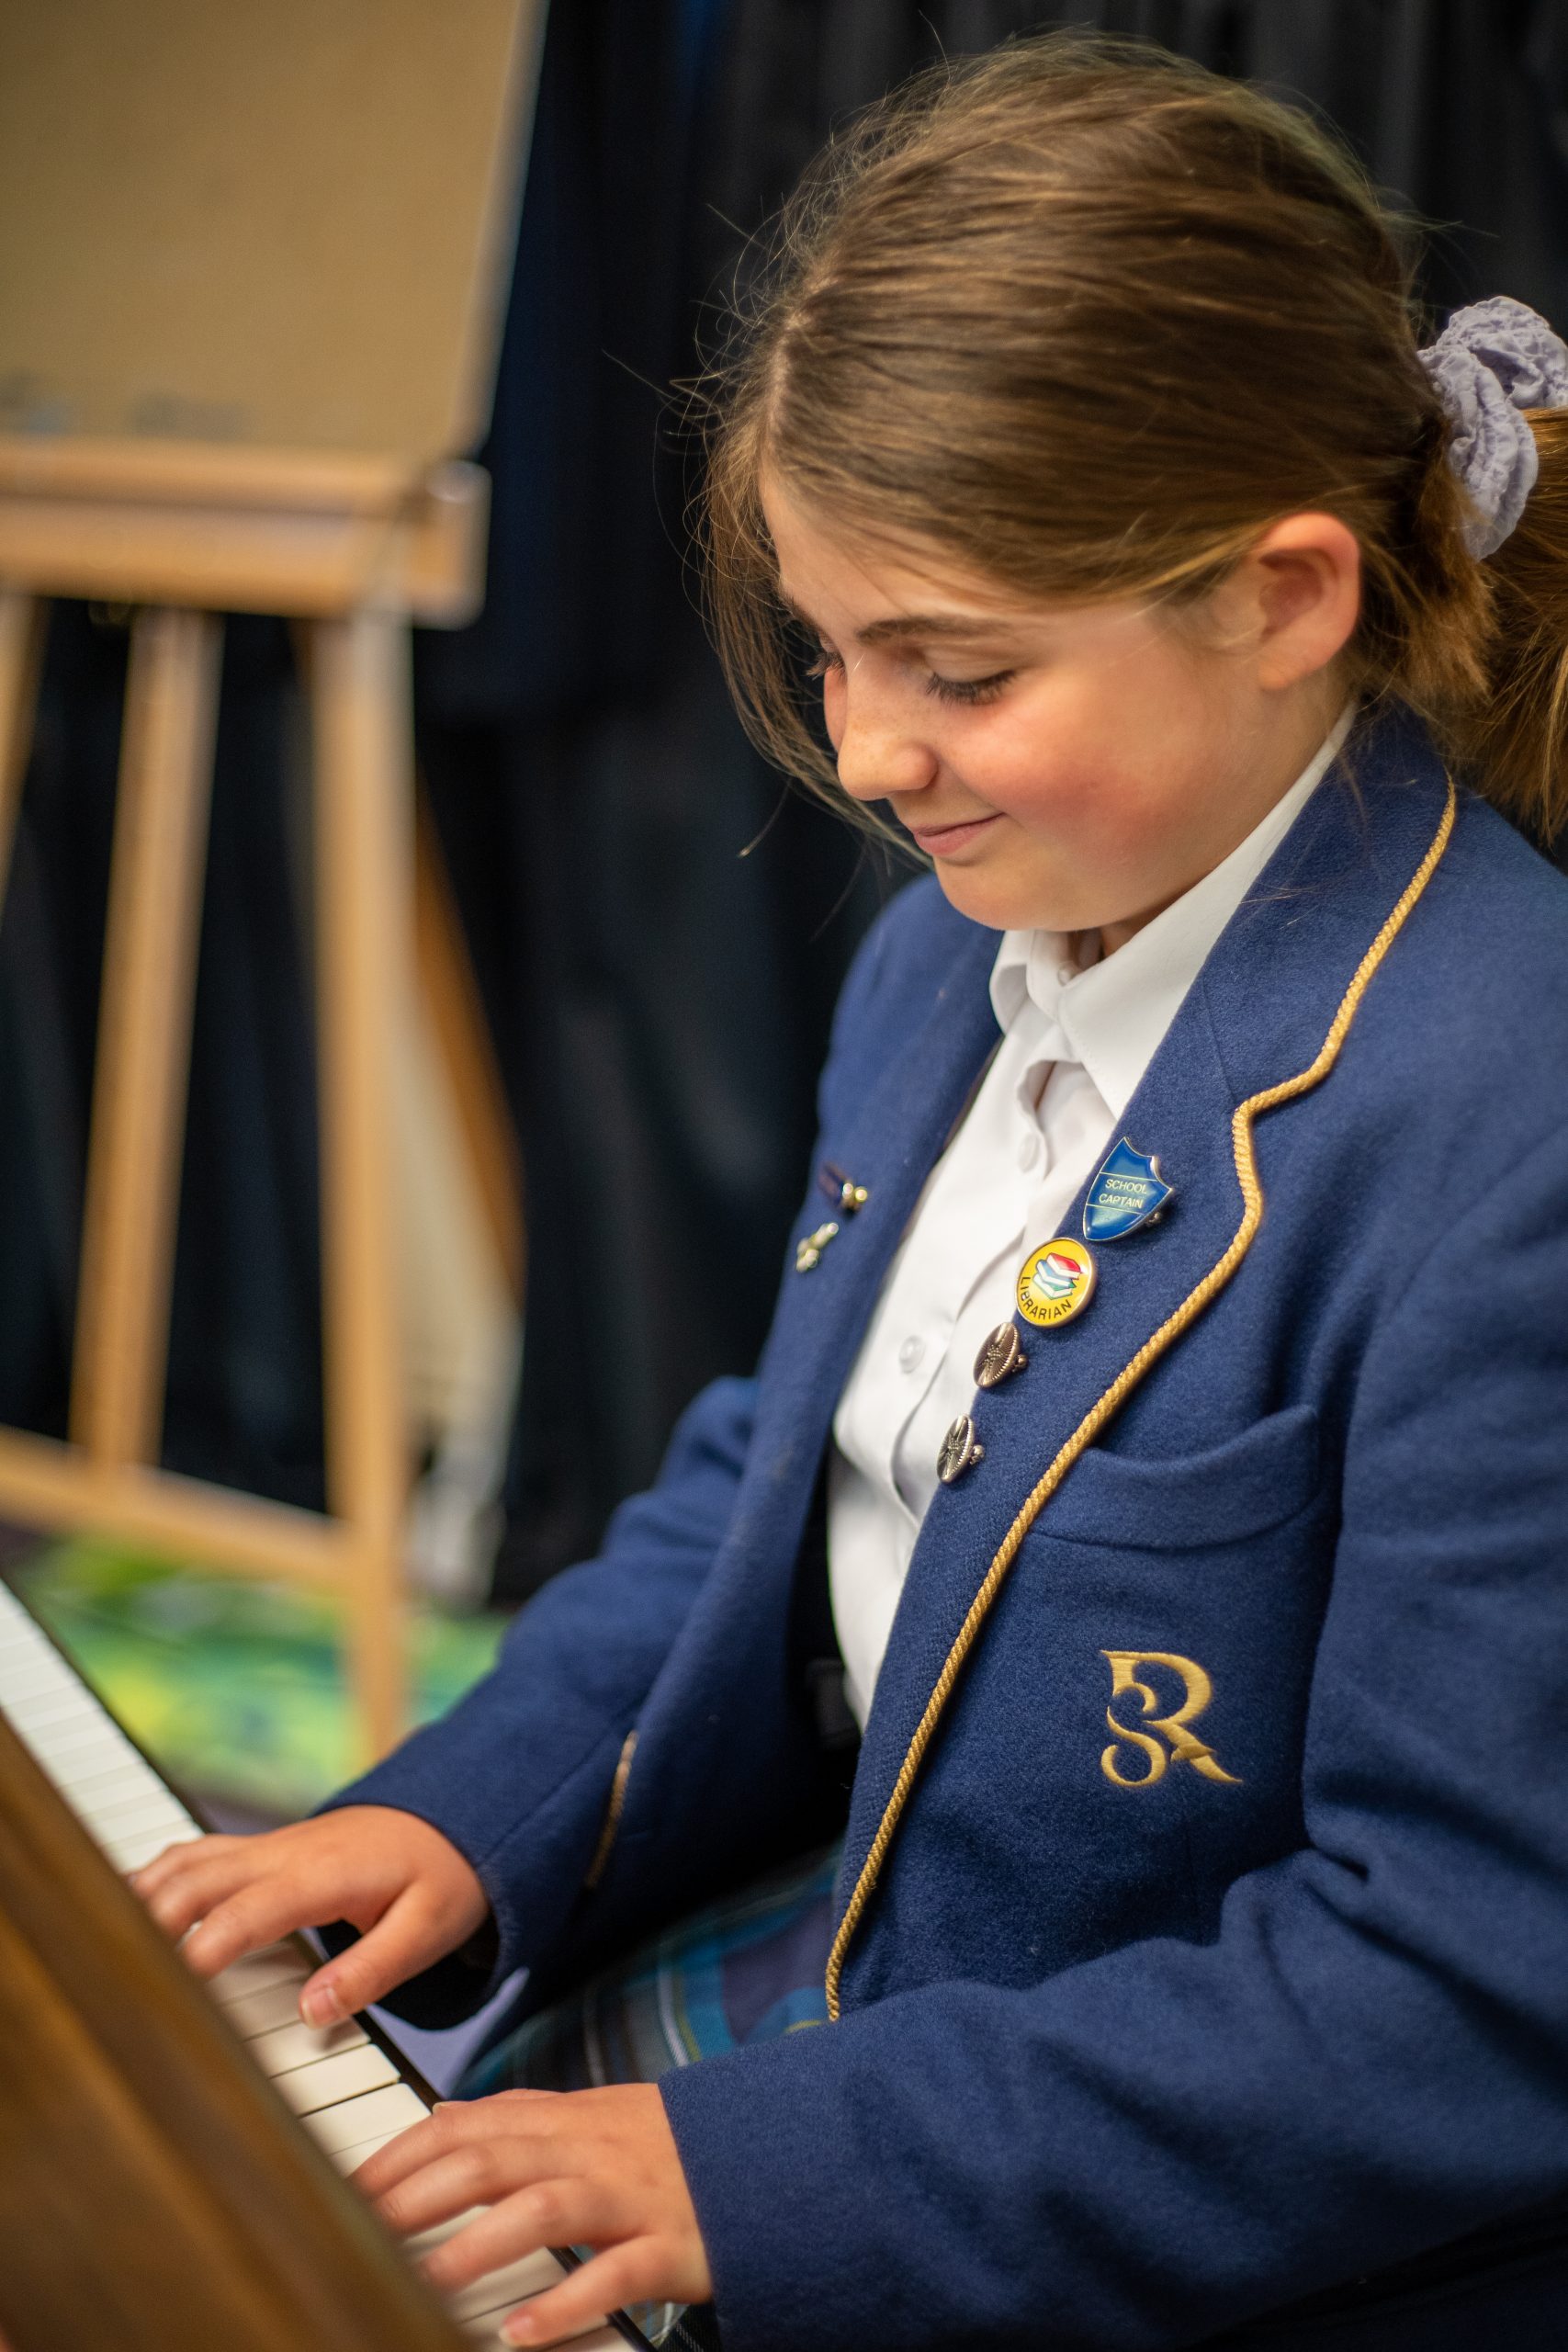 A Rookwood year 5 student playing piano.